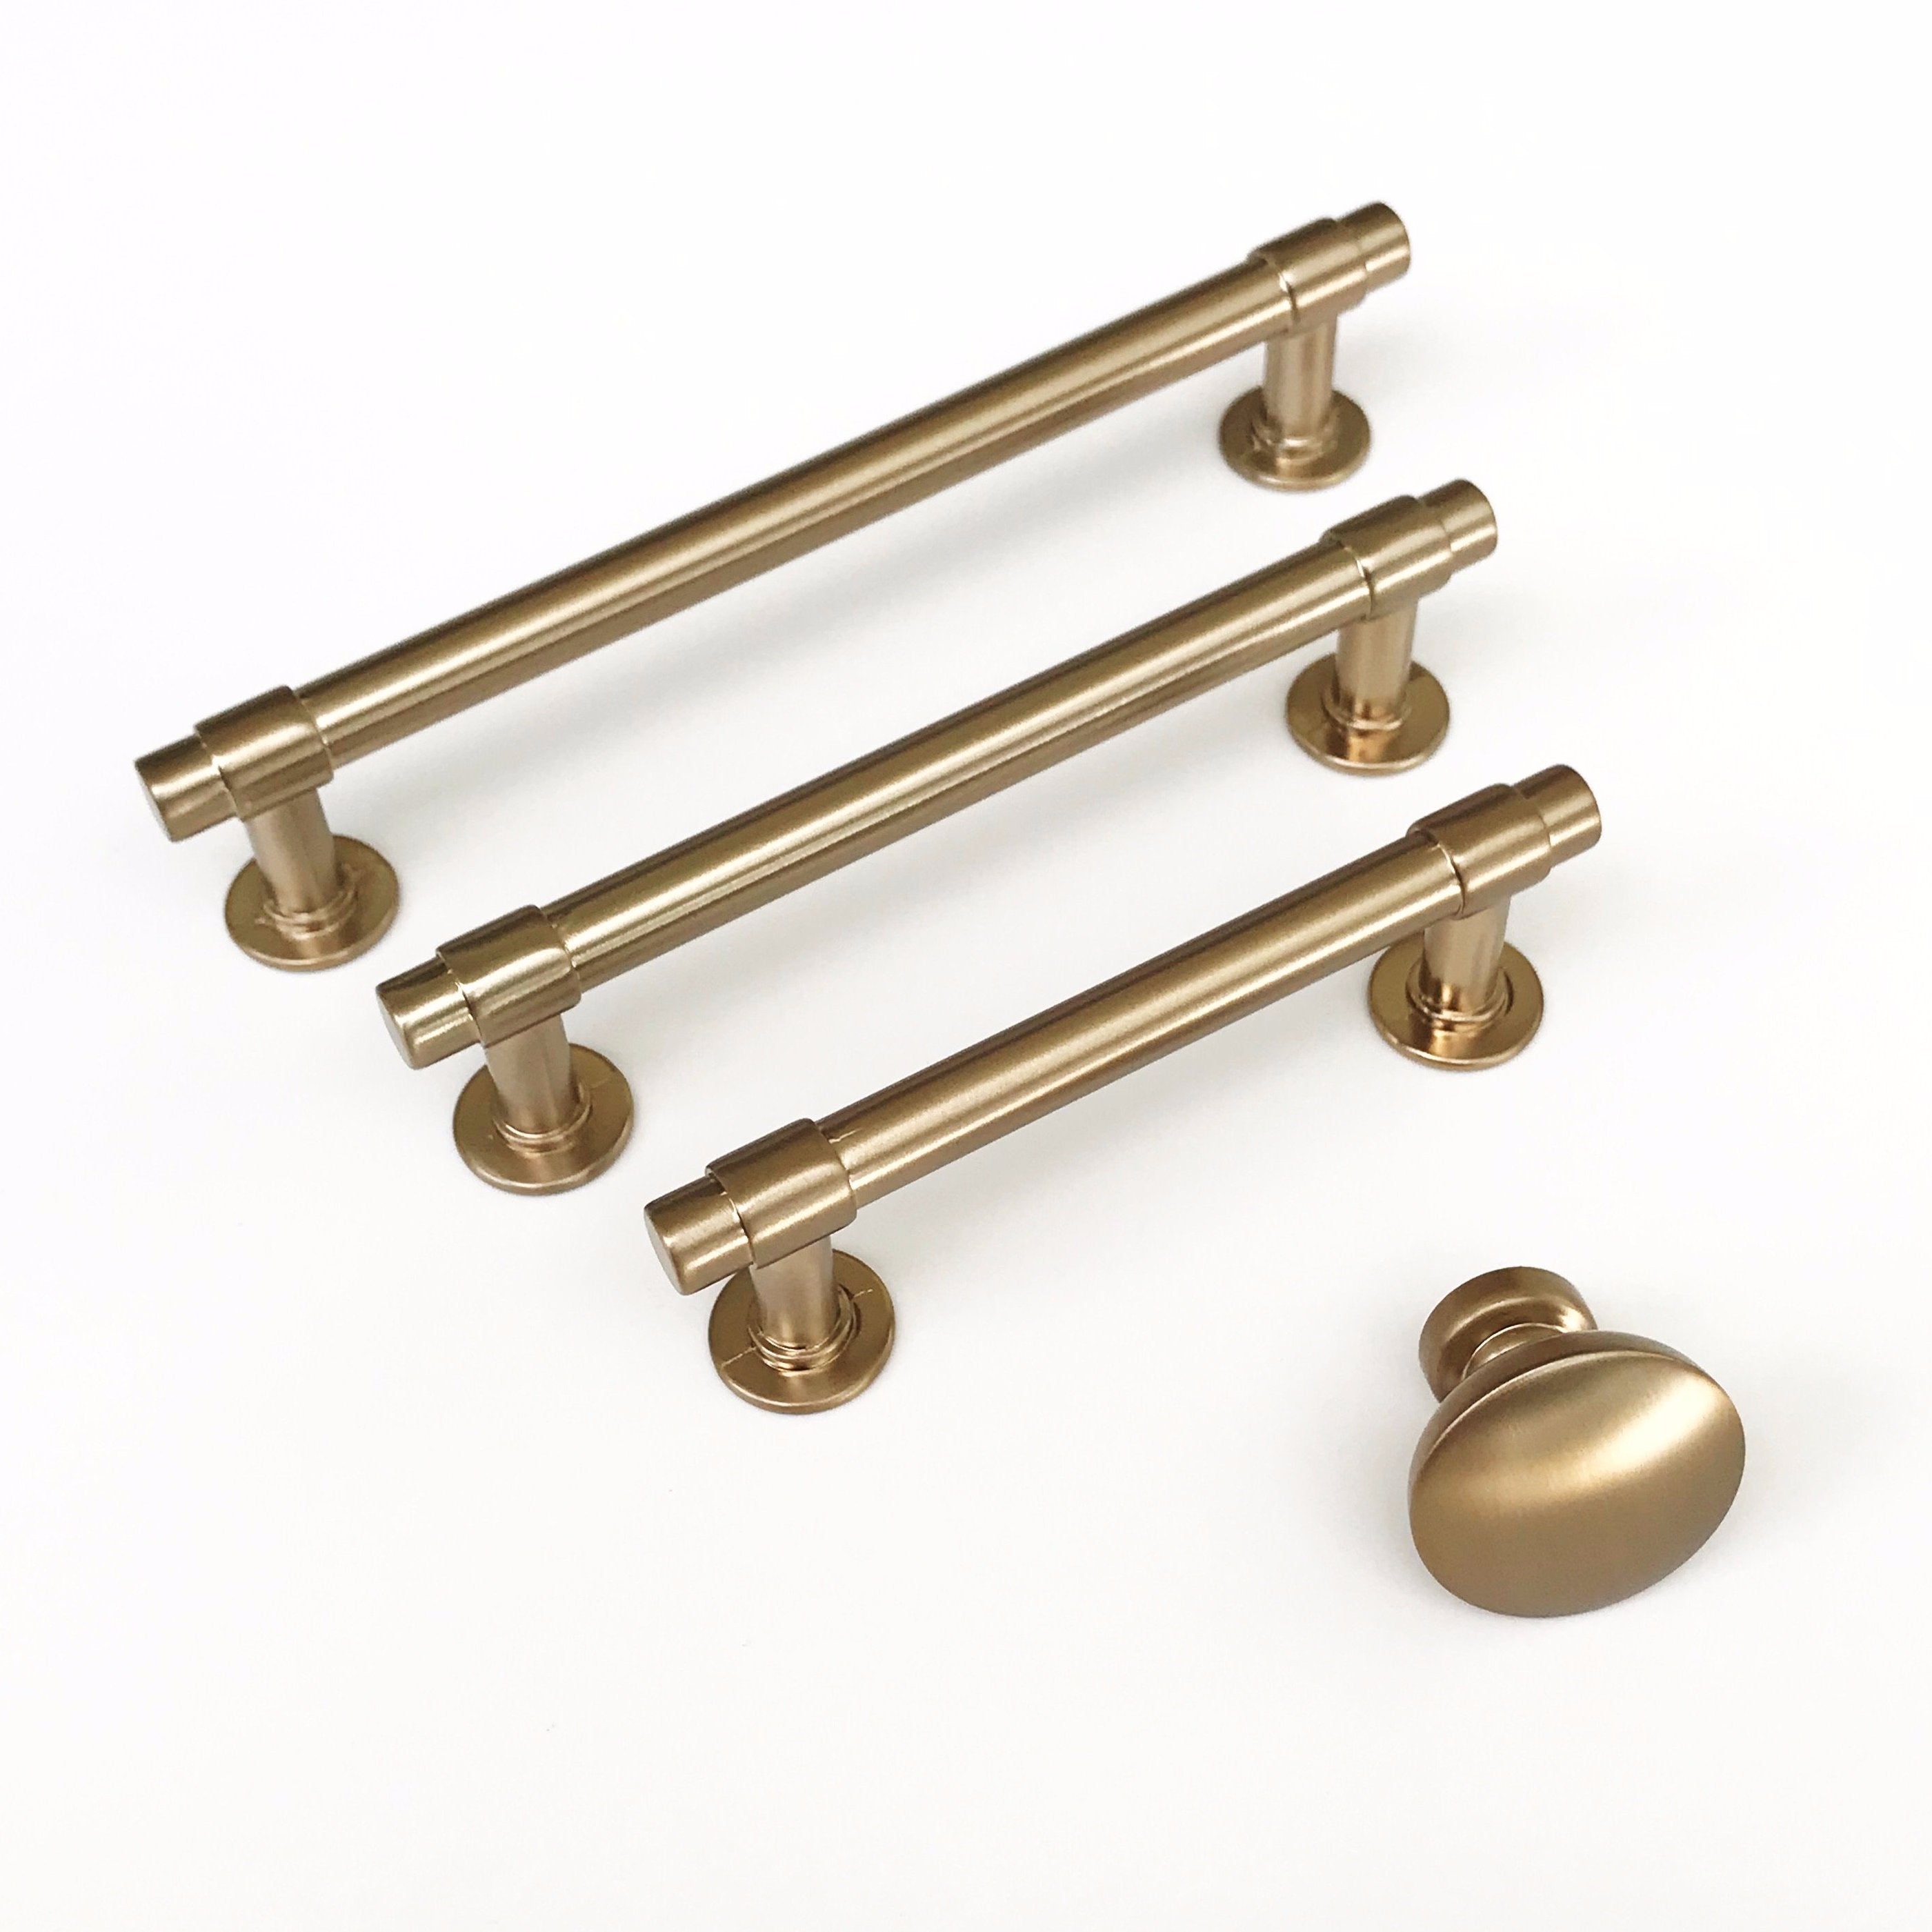 Antique Bronze 3.75 Drawer Pulls With Bail Ring Ideal For Kitchen Cabinets  And Brass Door From Jmqj66, $3.31